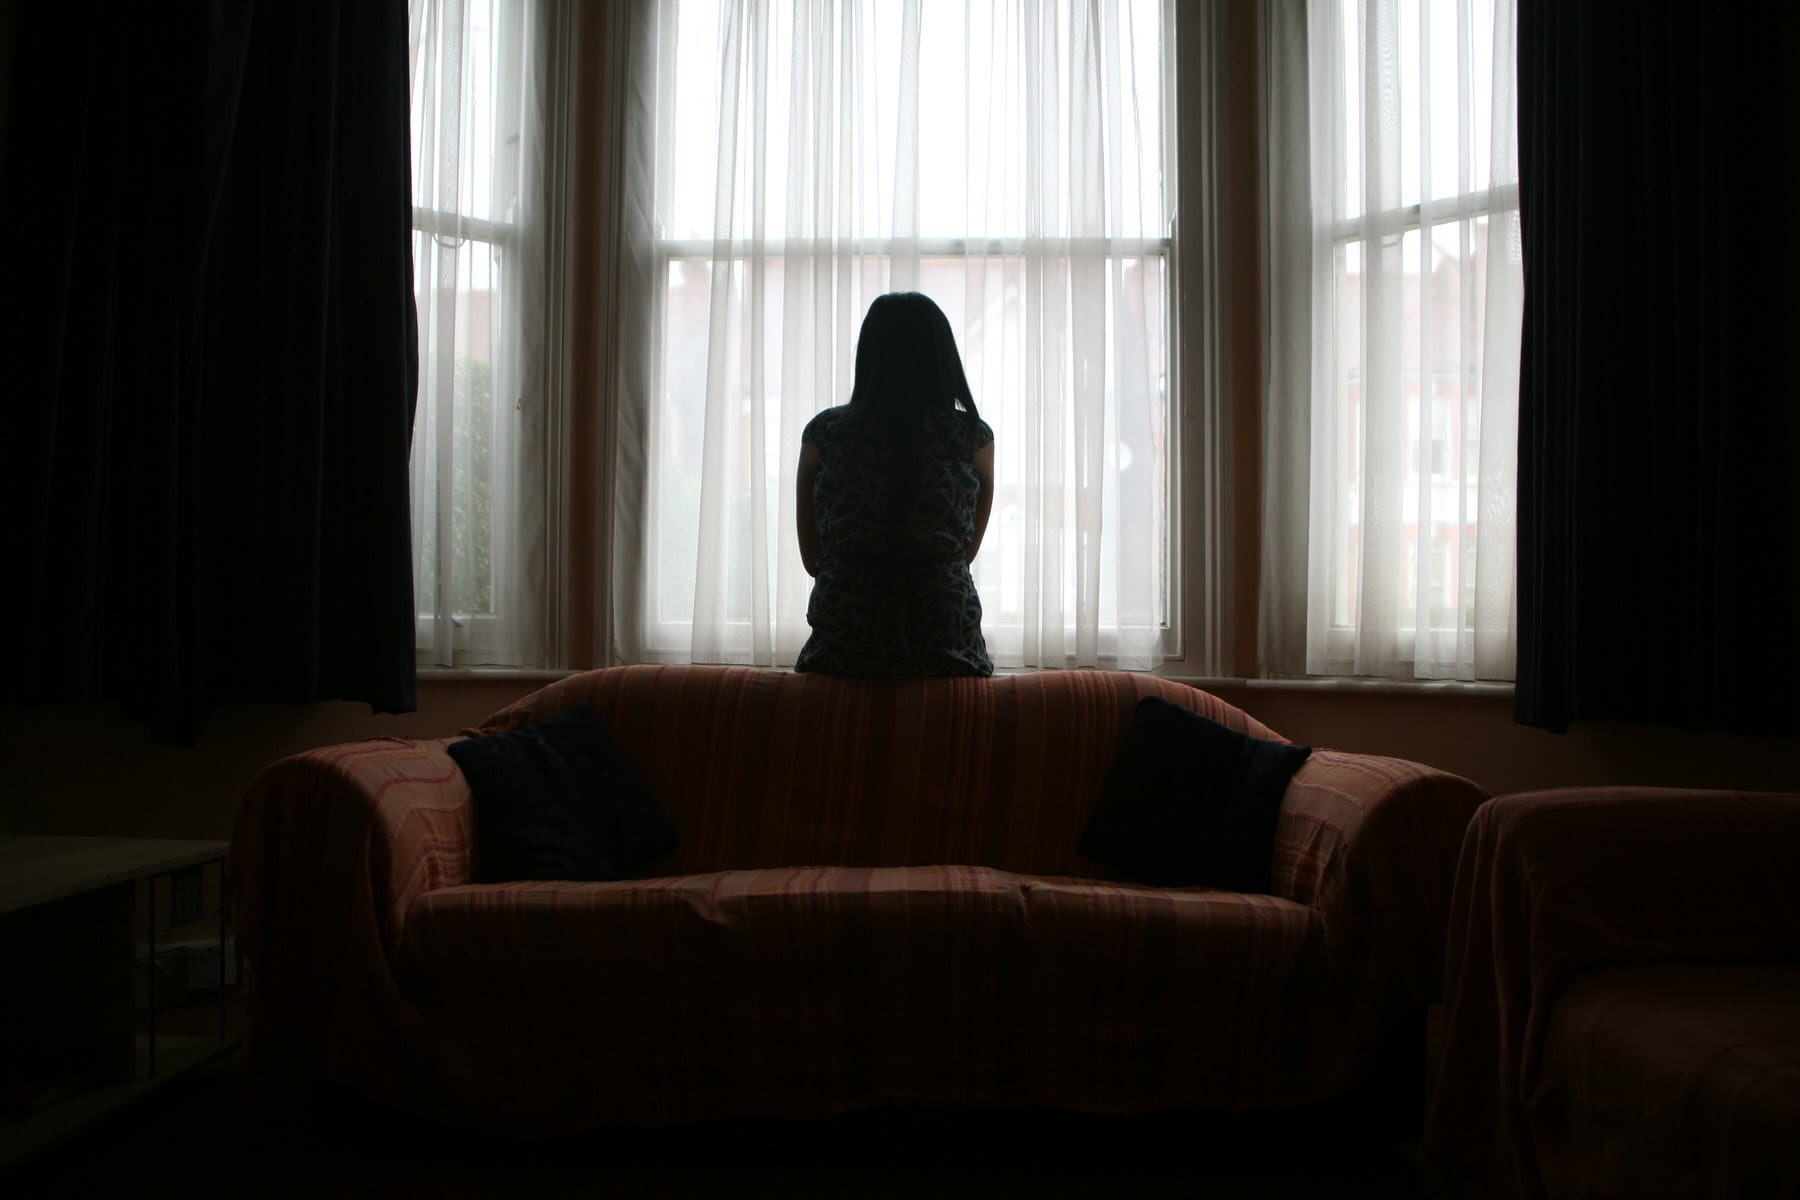 A young Asian woman suffering from domestic violence stands alone in the bay window of her home.